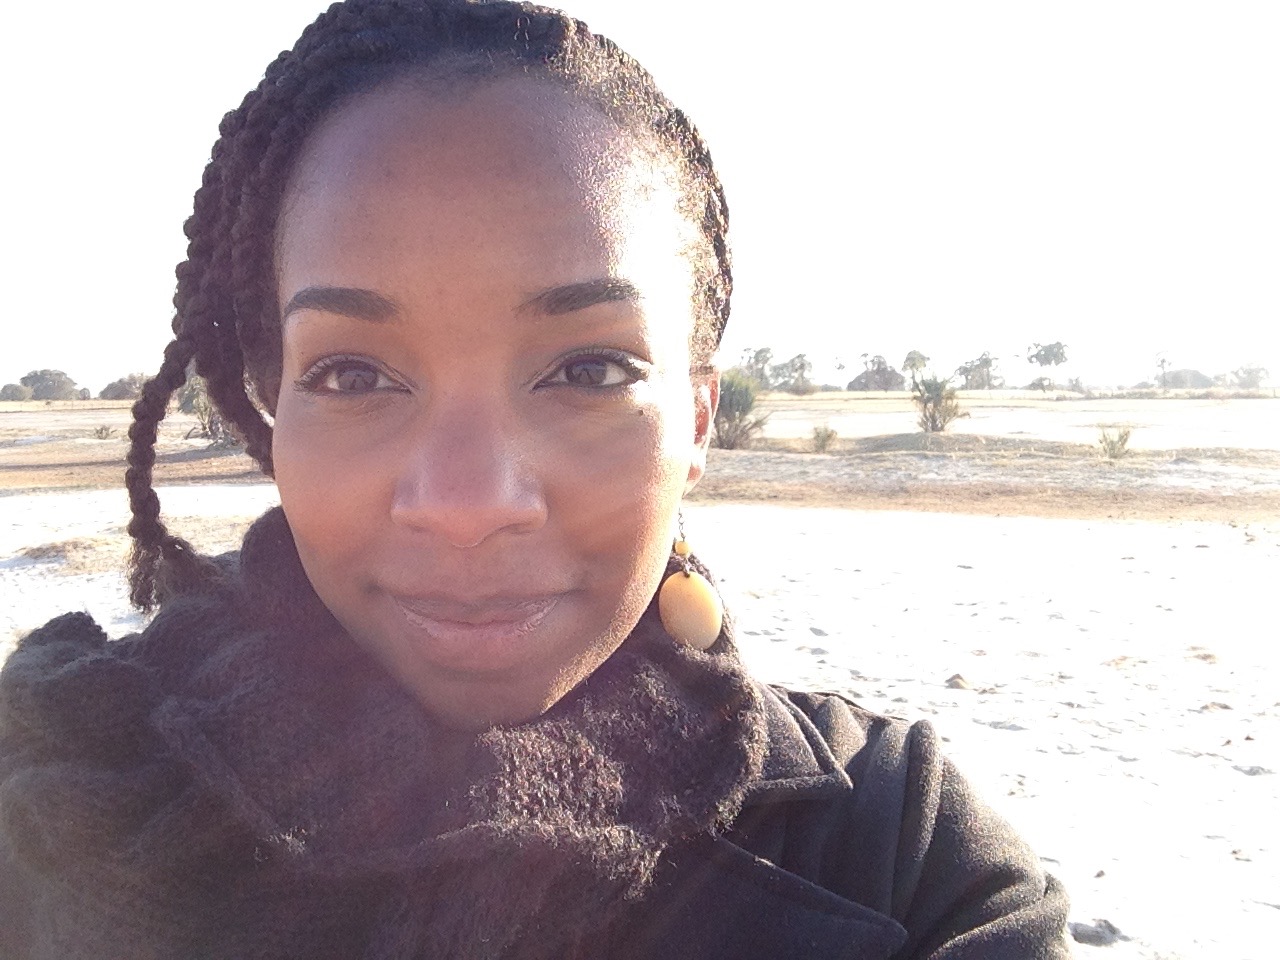 (Village selfie) Yes, it gets cold in Africa!